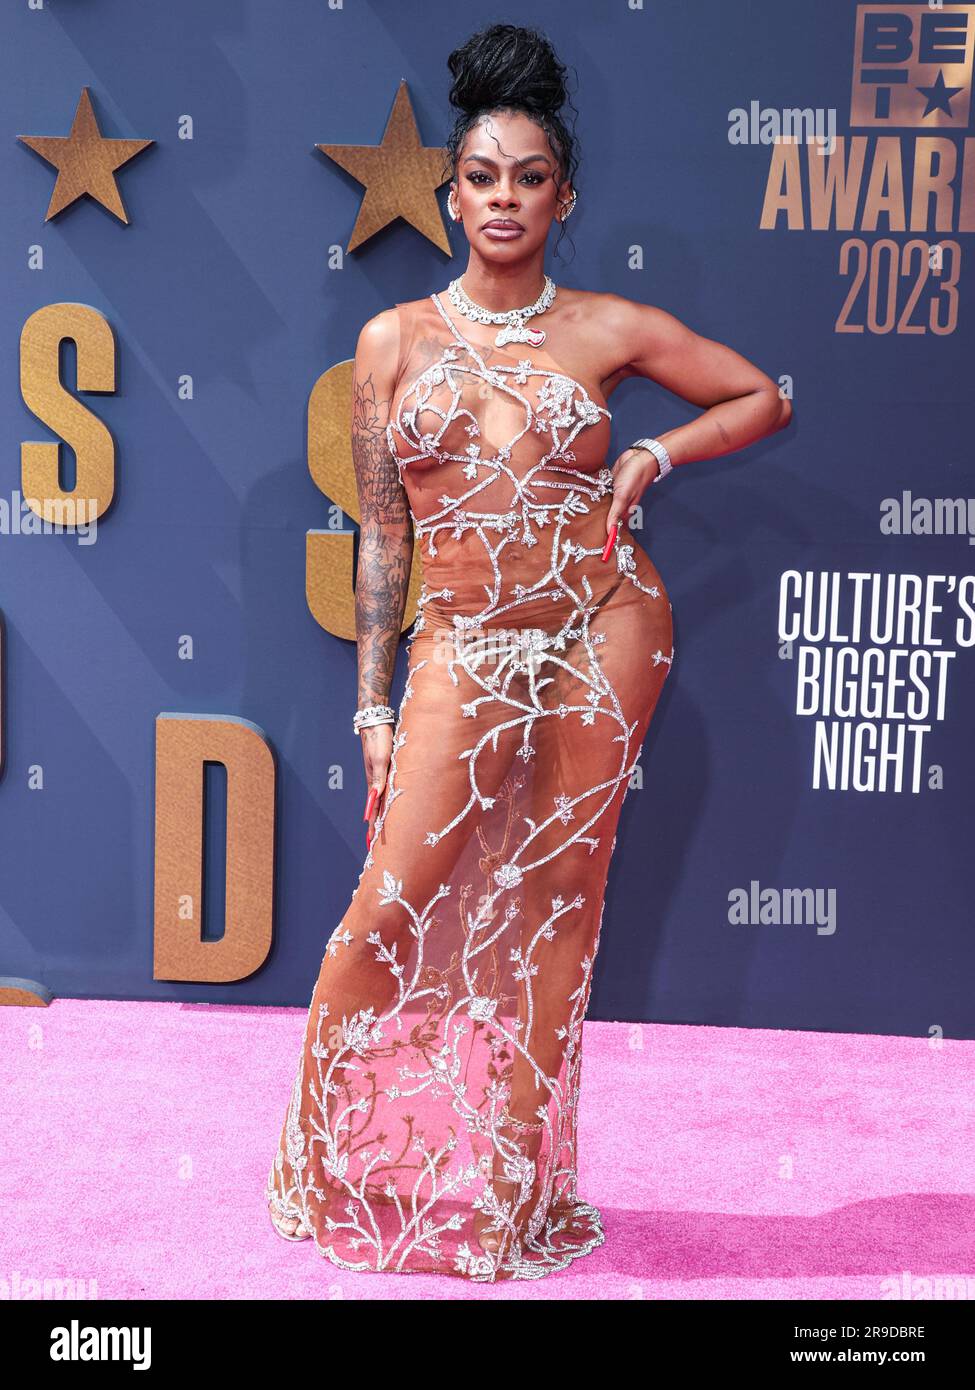 LOS ANGELES, CALIFORNIA, USA - JUNE 25: Jess Hilarious arrives at the BET Awards 2023 held at Microsoft Theater at L.A. Live on June 25, 2023 in Los Angeles, California, United States. (Photo by Xavier Collin/Image Press Agency) Stock Photo